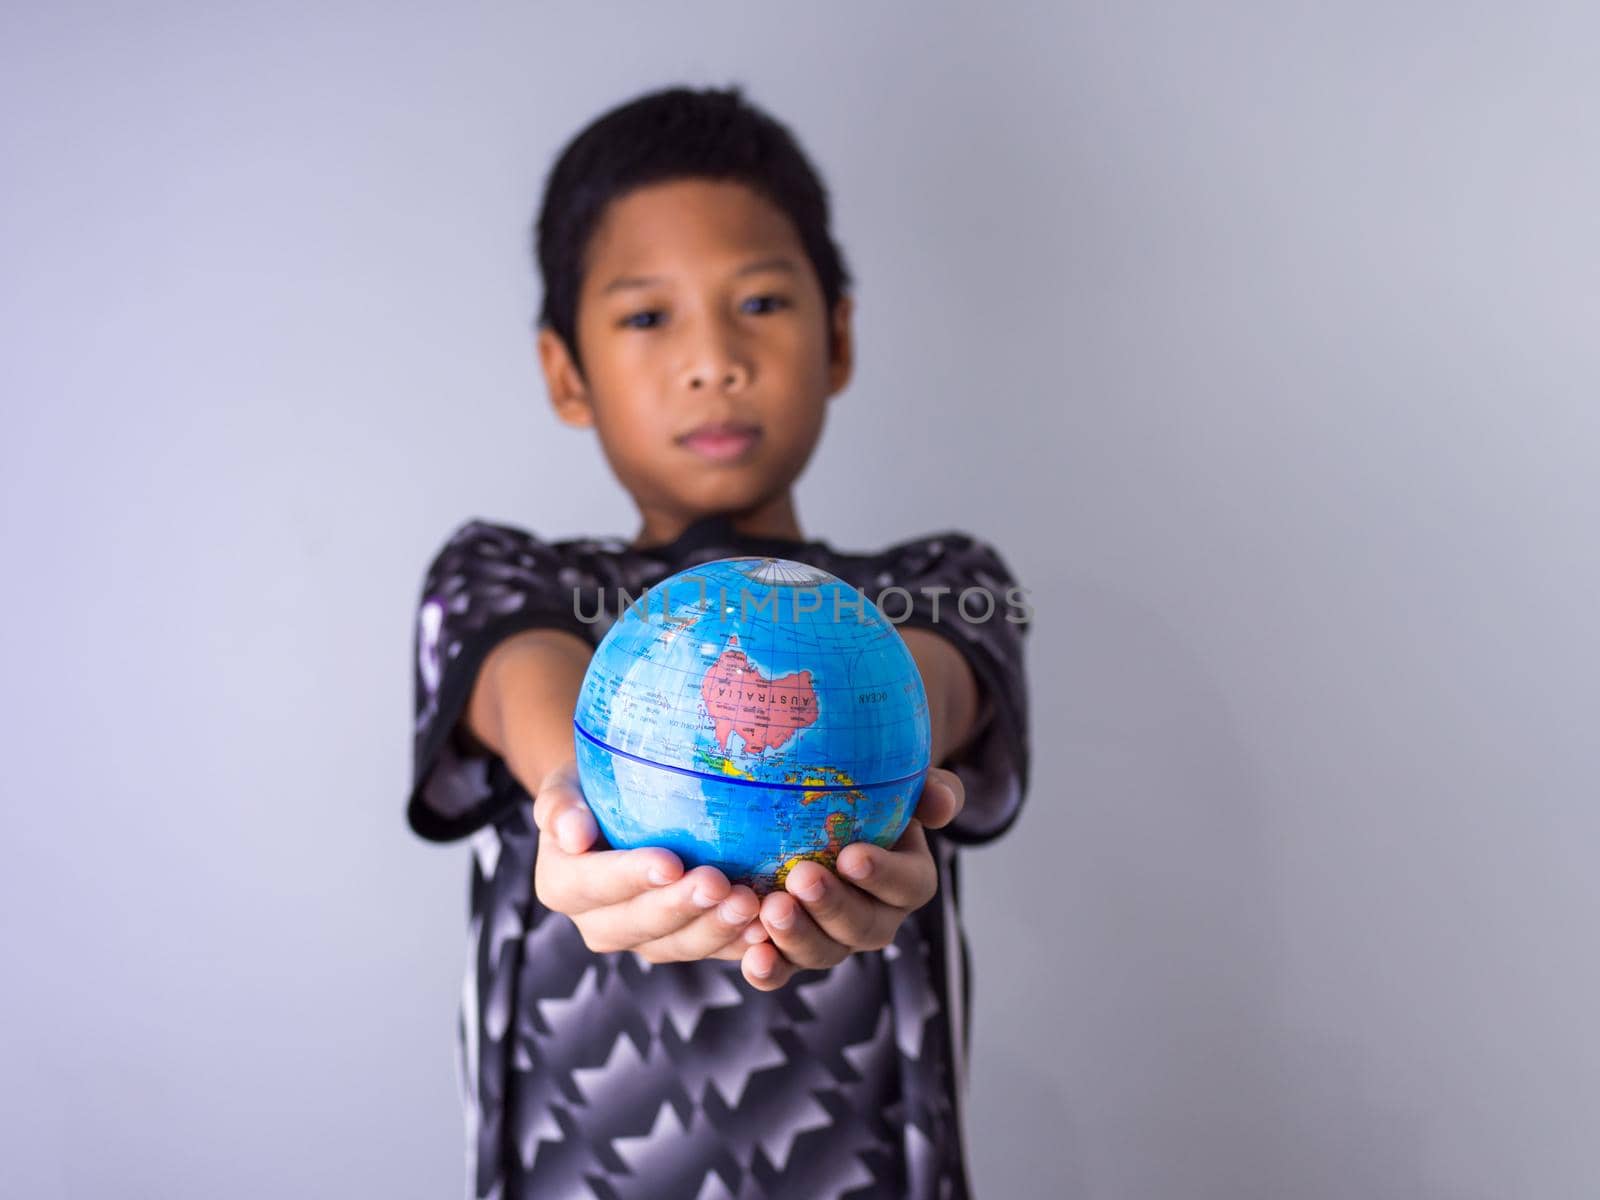 boy holding a globe stand out in front Show the power of the new generation to continue to develop our world. by Unimages2527